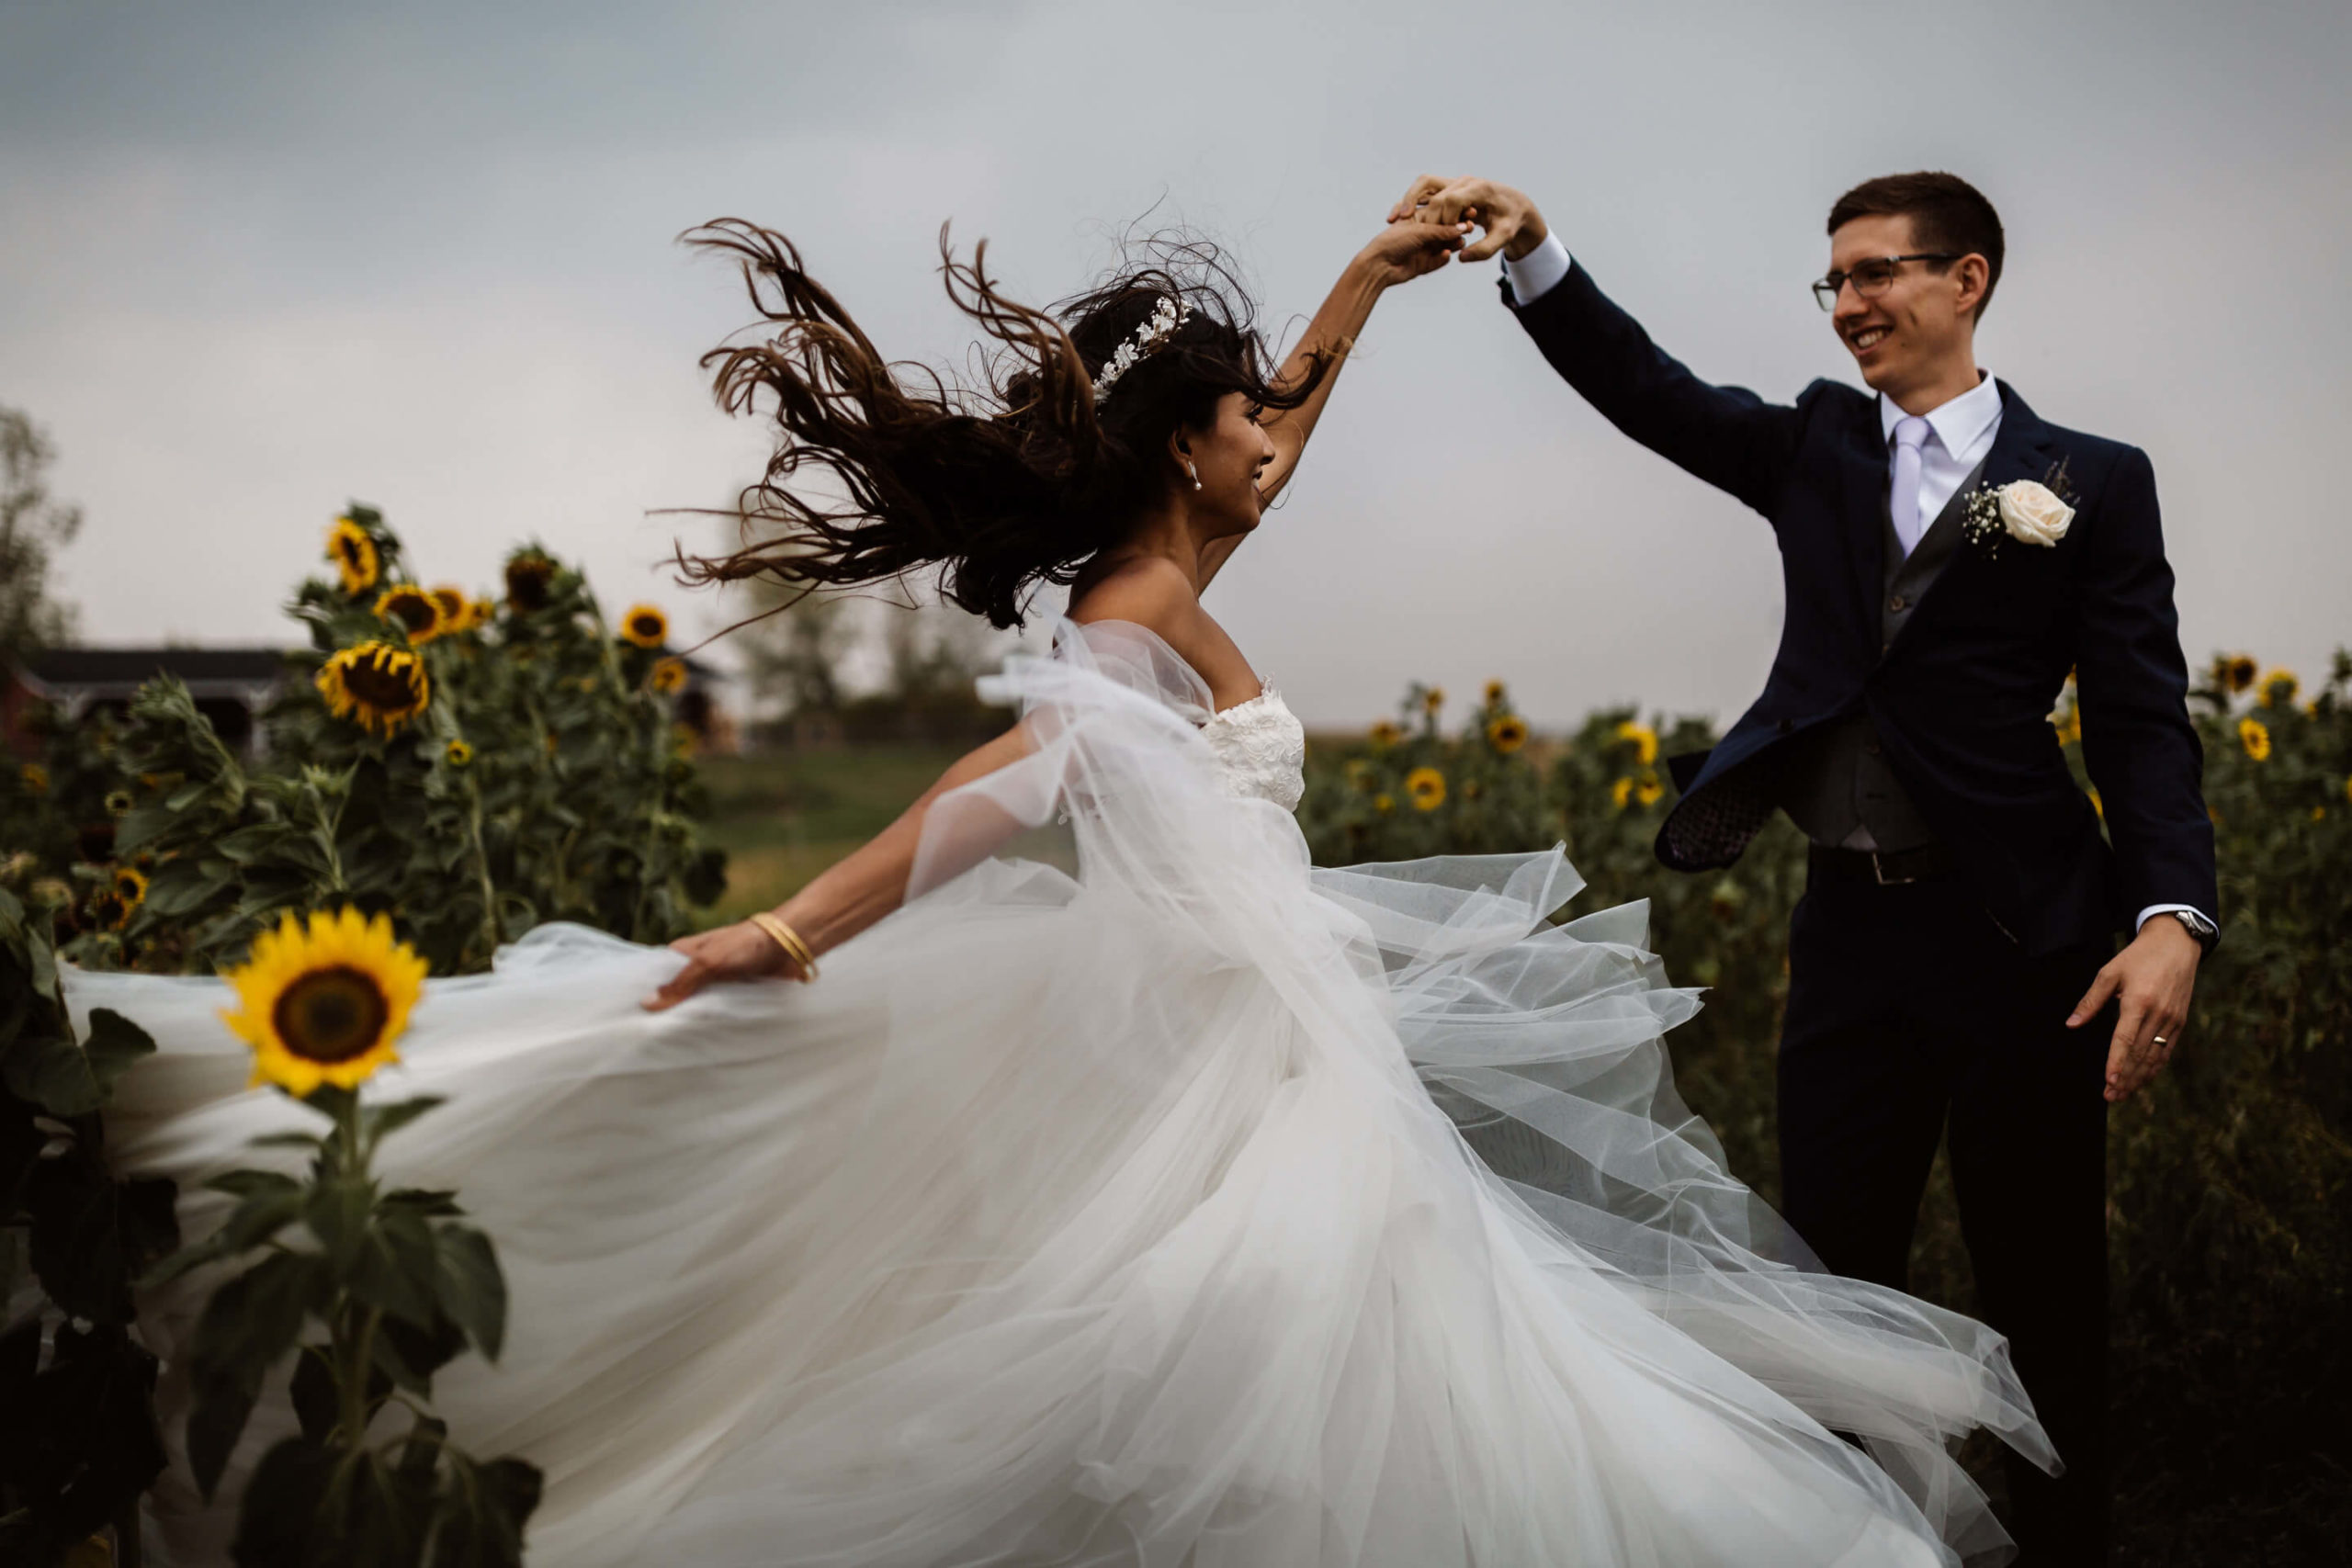 A bride and groom dancing in a field of sunflowers.